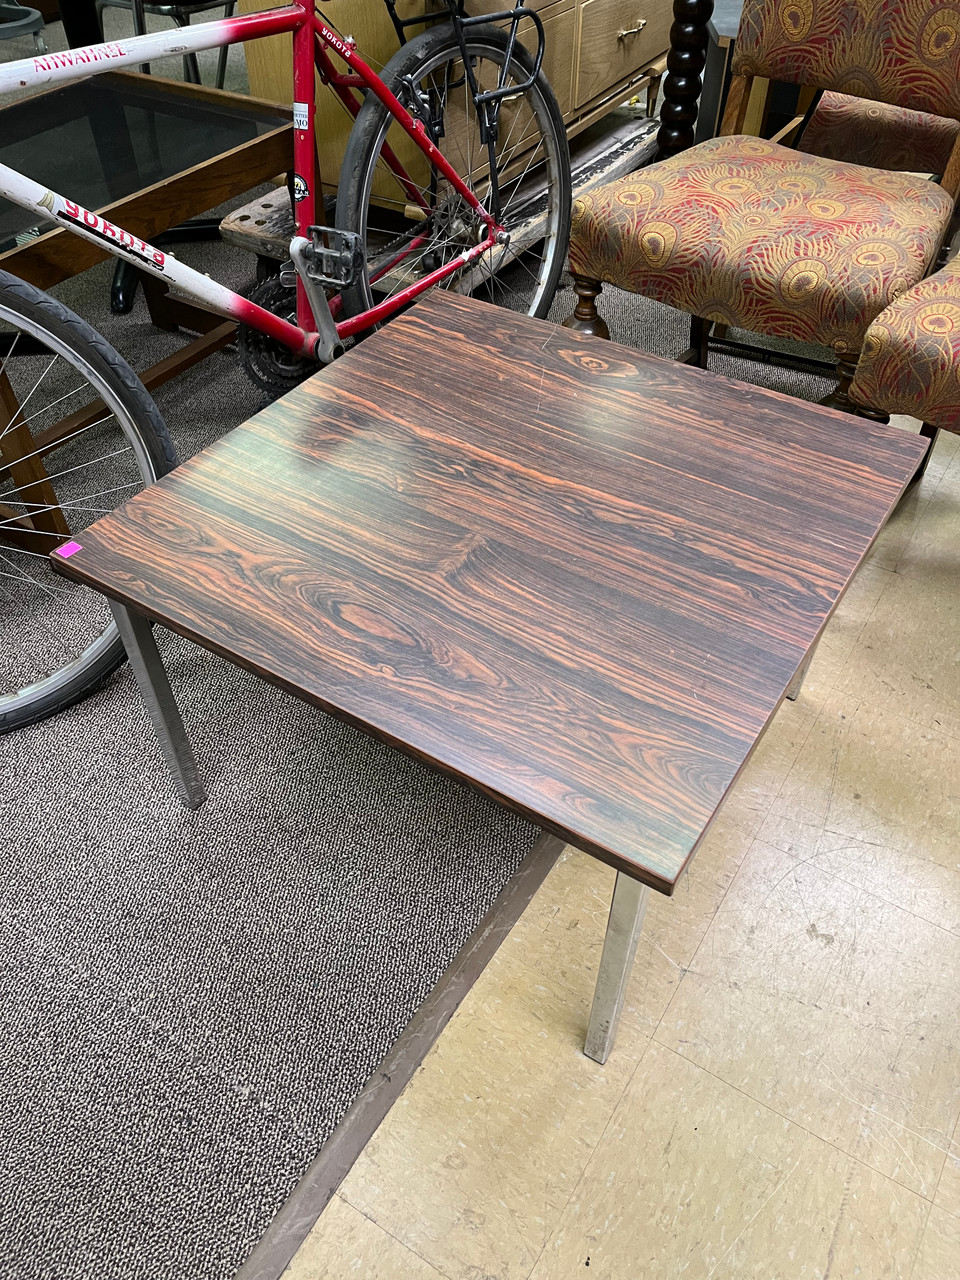 Small Table/Coffee Table - Arborite and Metal